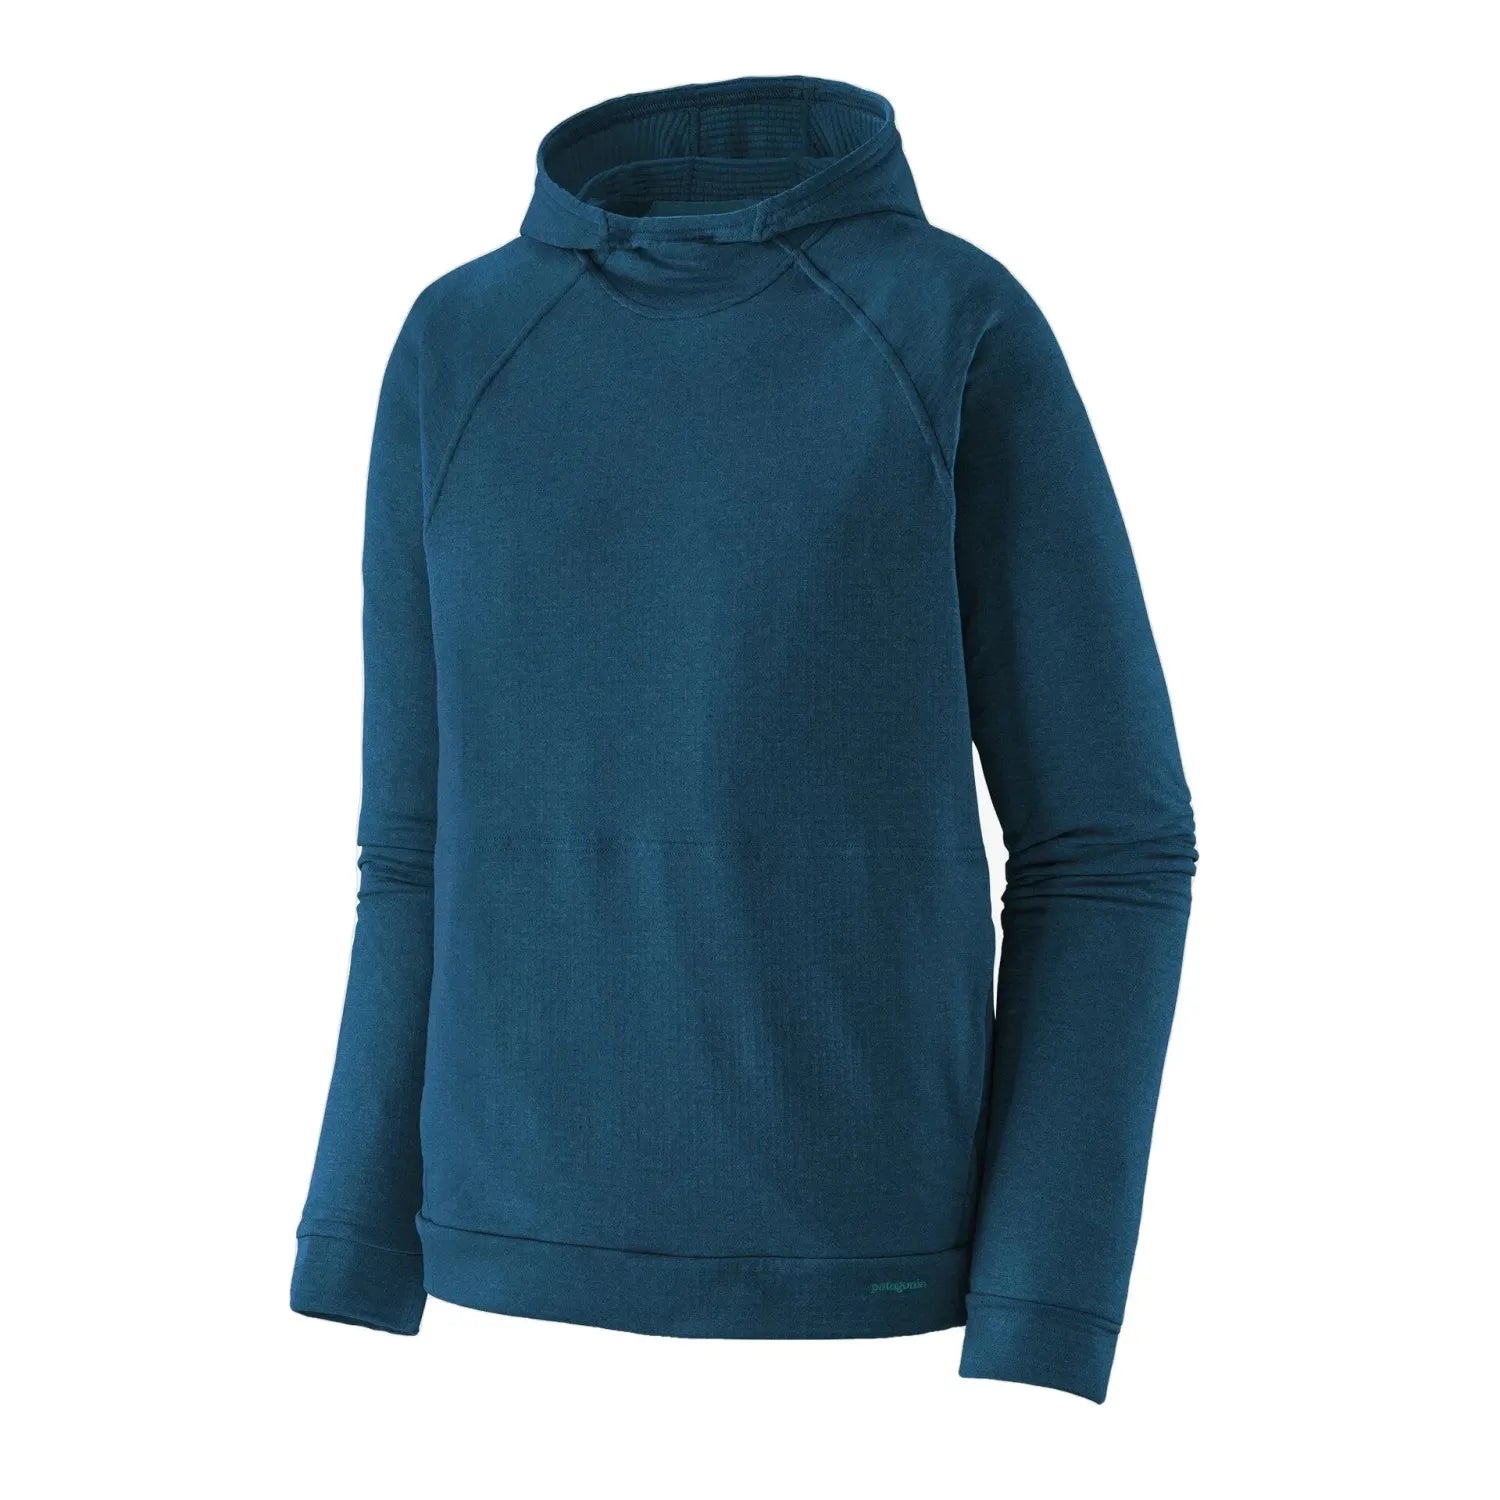 Patagonia Men's Capilene® Thermal Hoody shown in Lagom Blue - Front view.